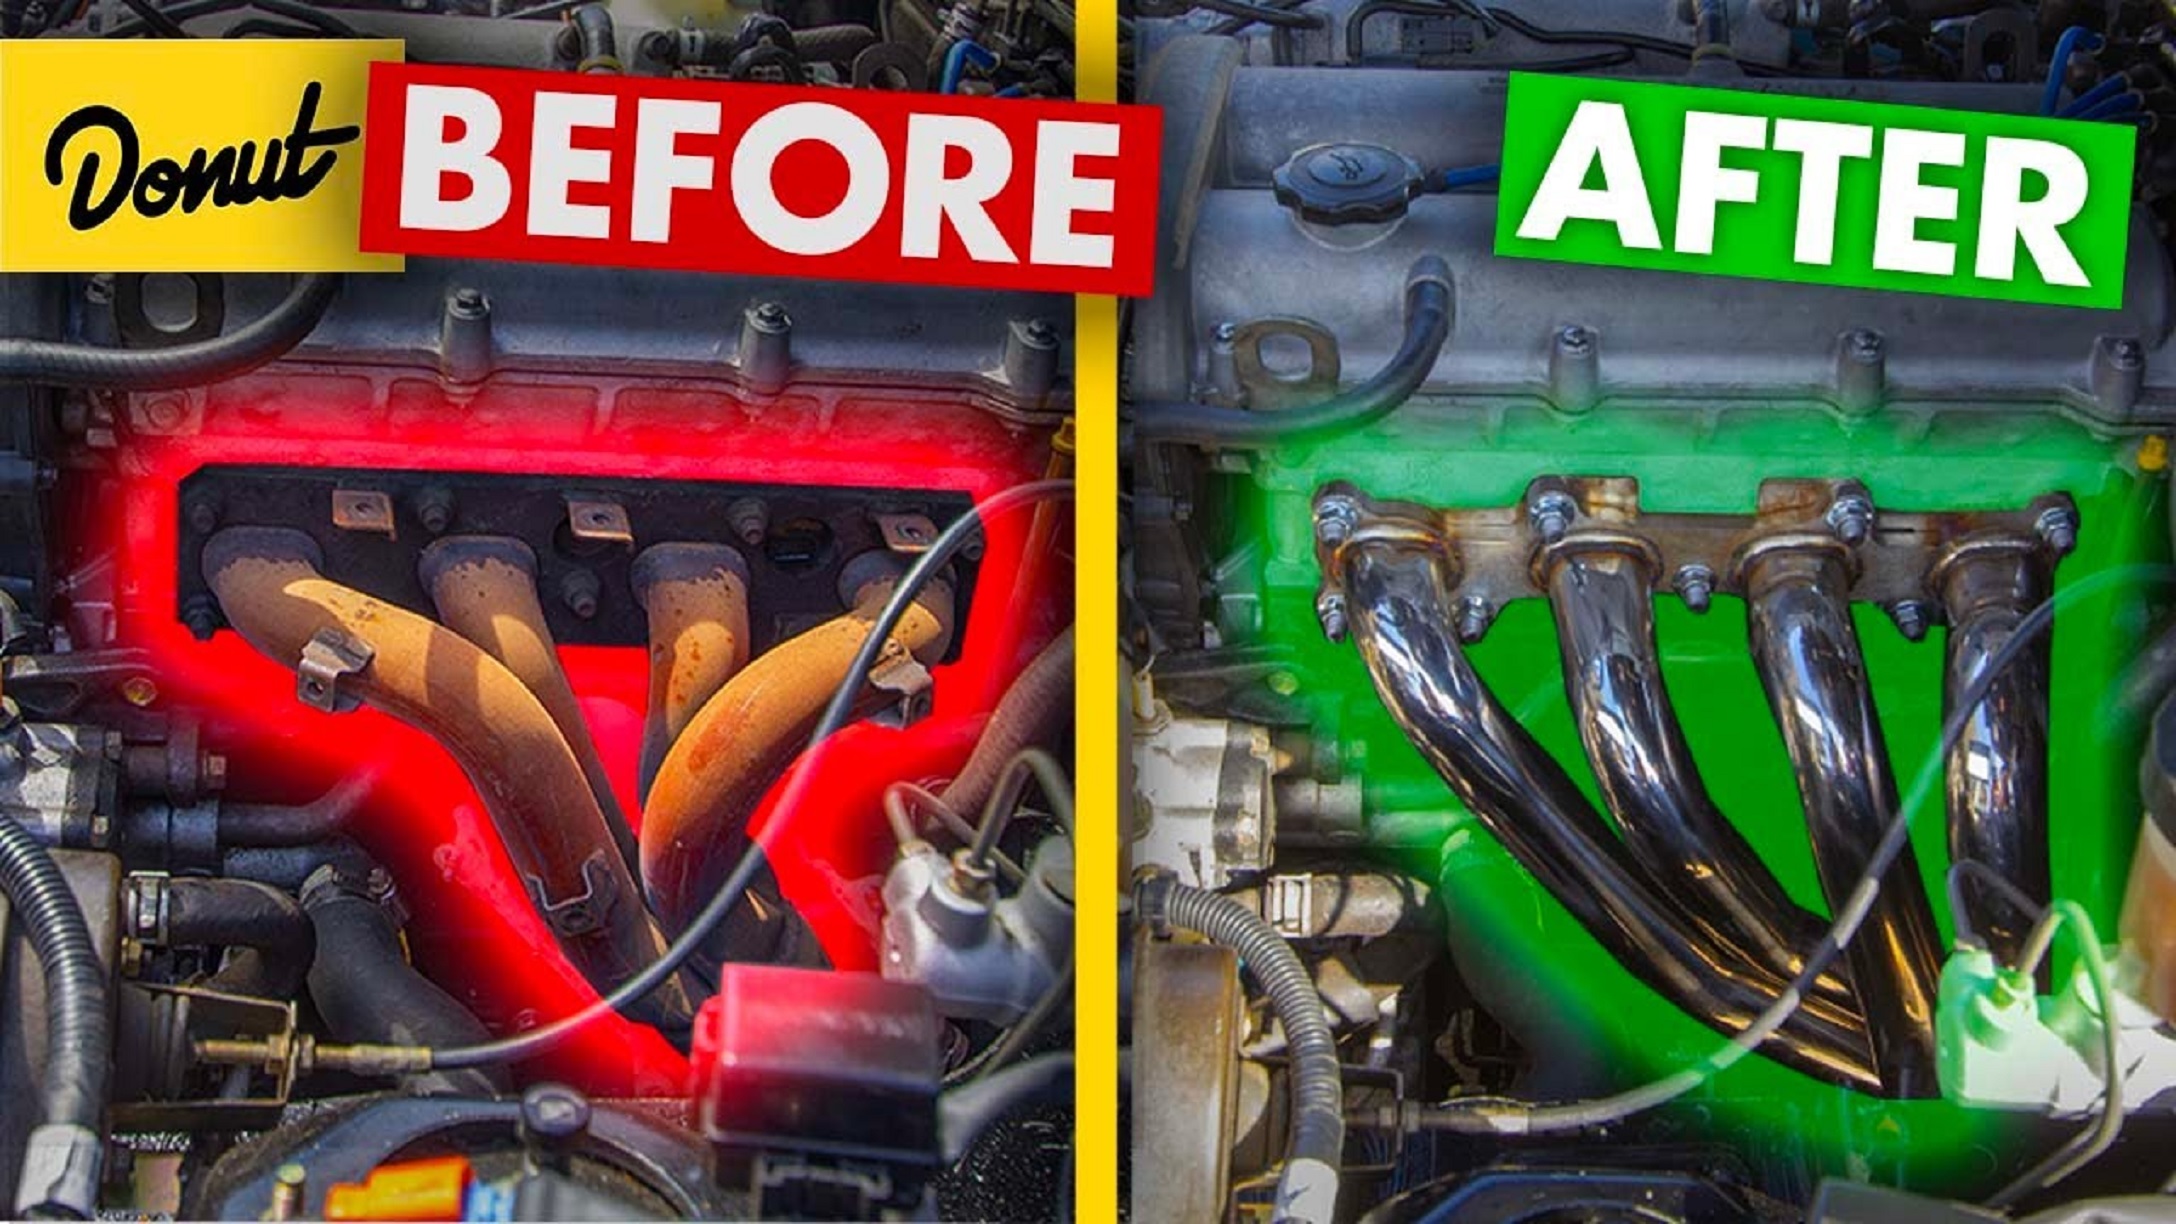 Upgrading to aftermarket exhaust headers for better flow